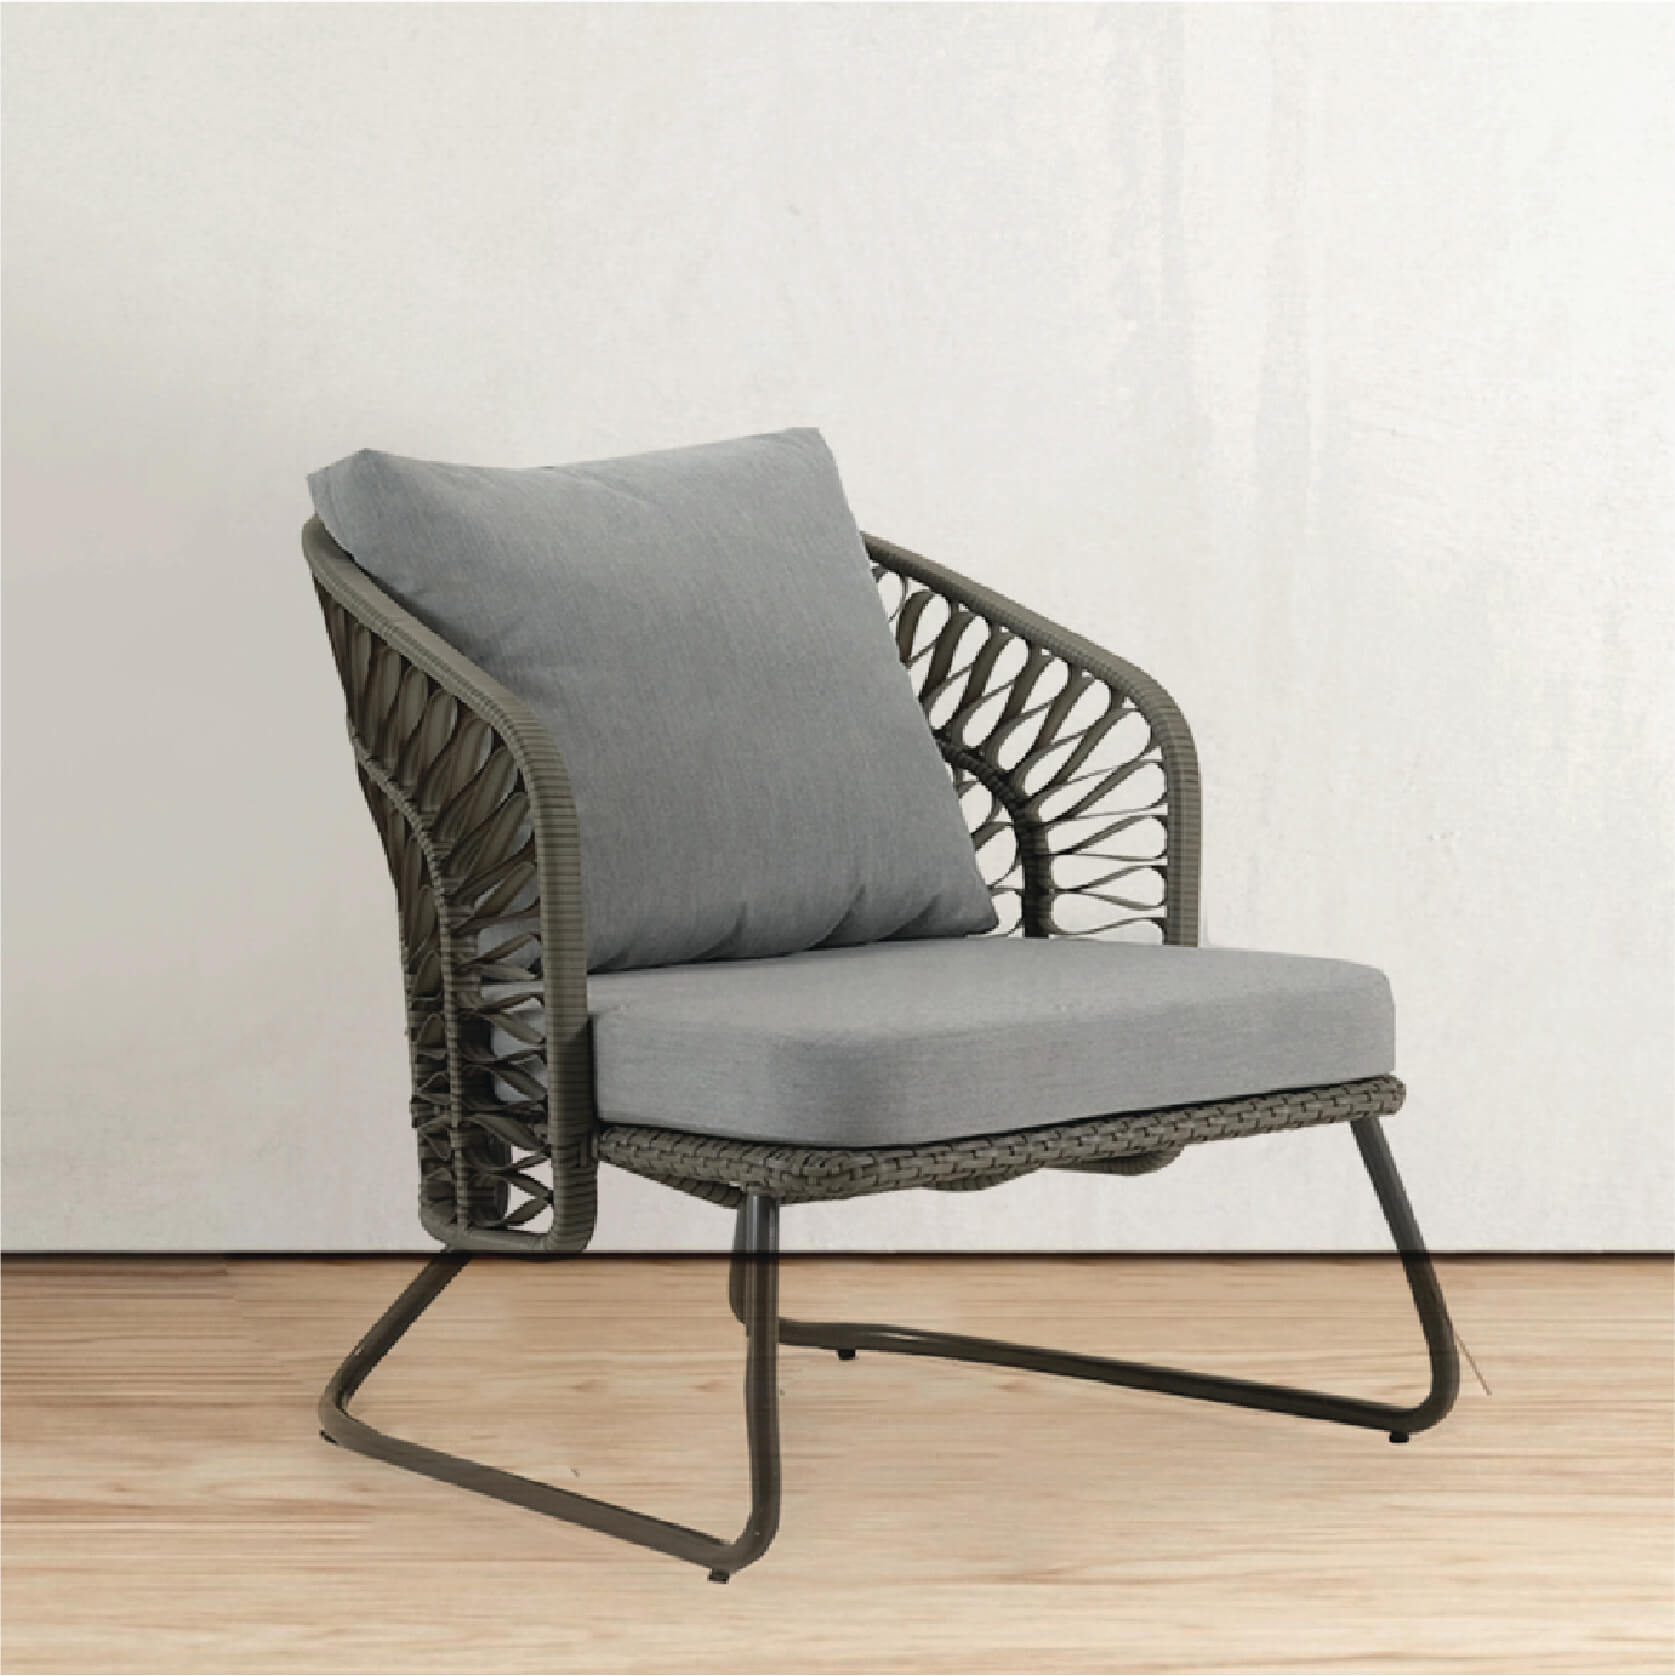 AKHO LOUNGE CHAIR by Coast Pacific - Design Commune Feature